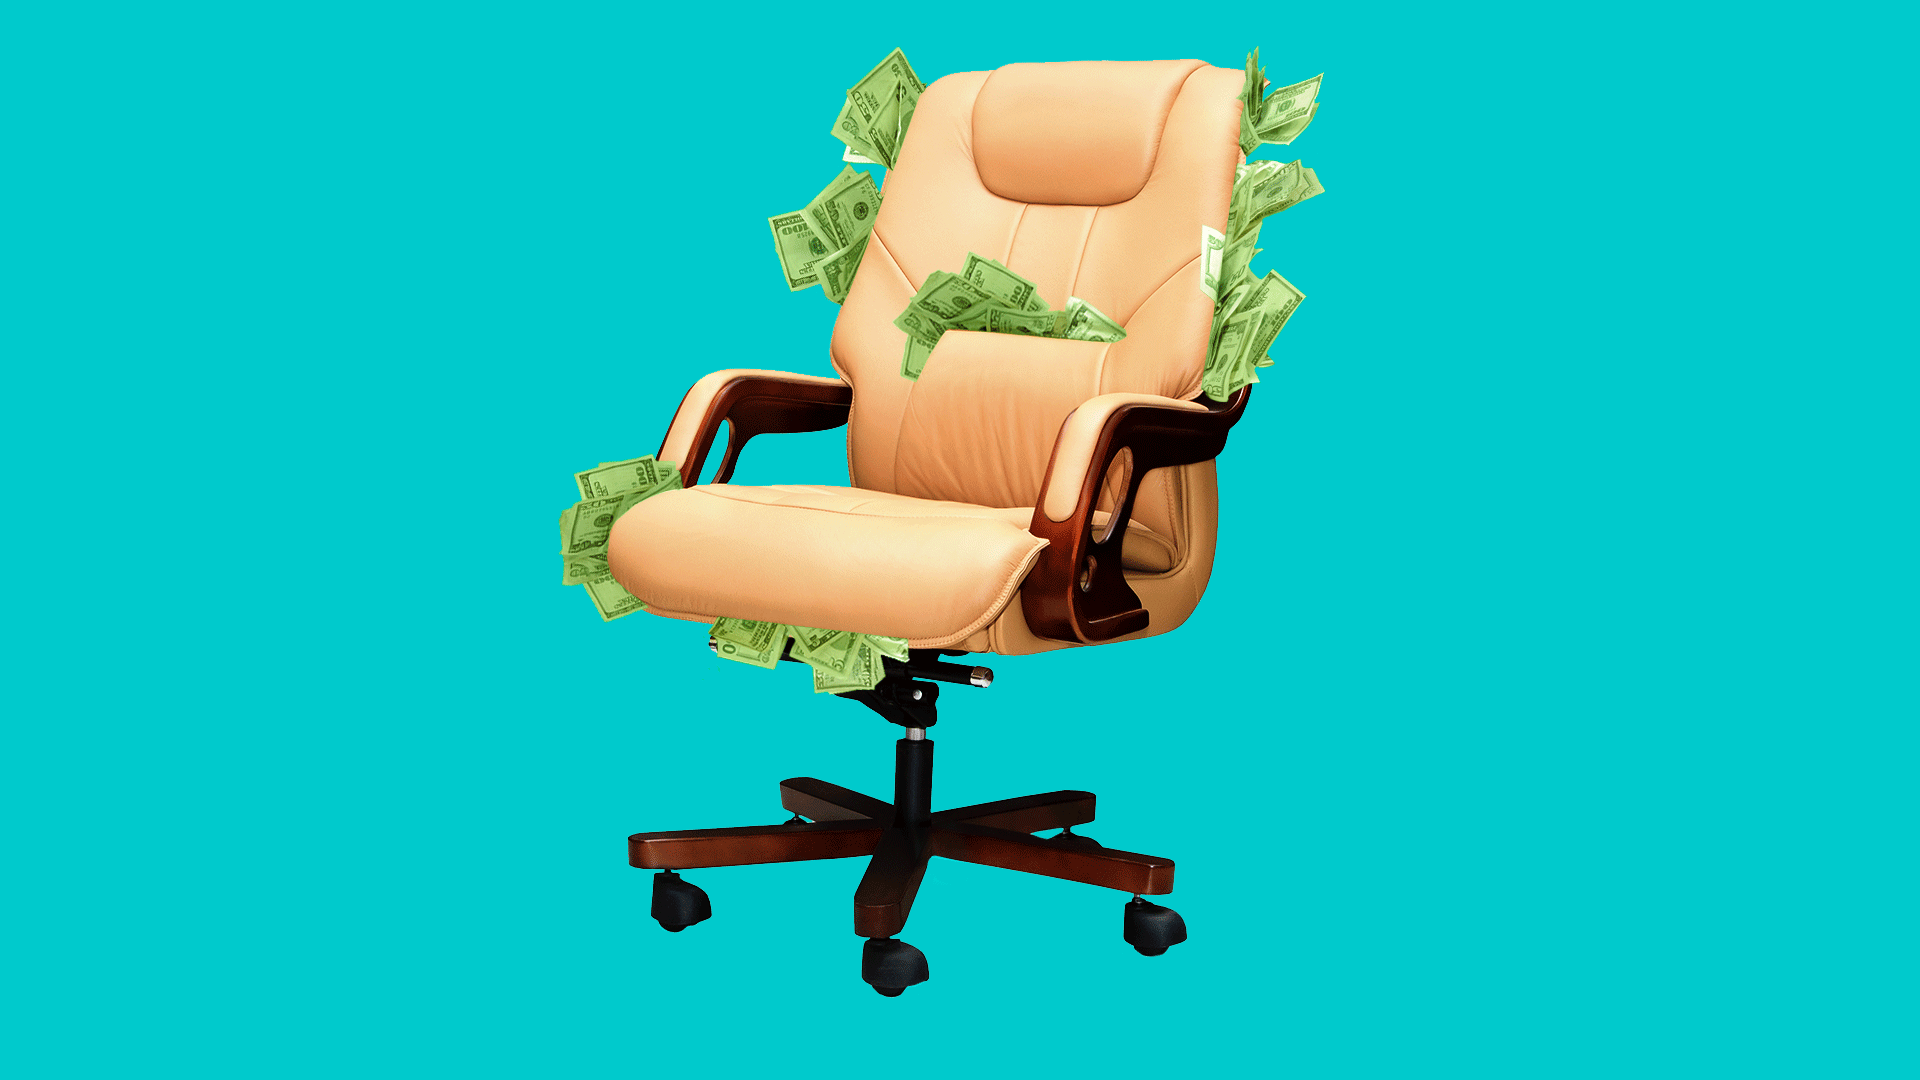 In this illustration, an office chair sits overstuffed with money.